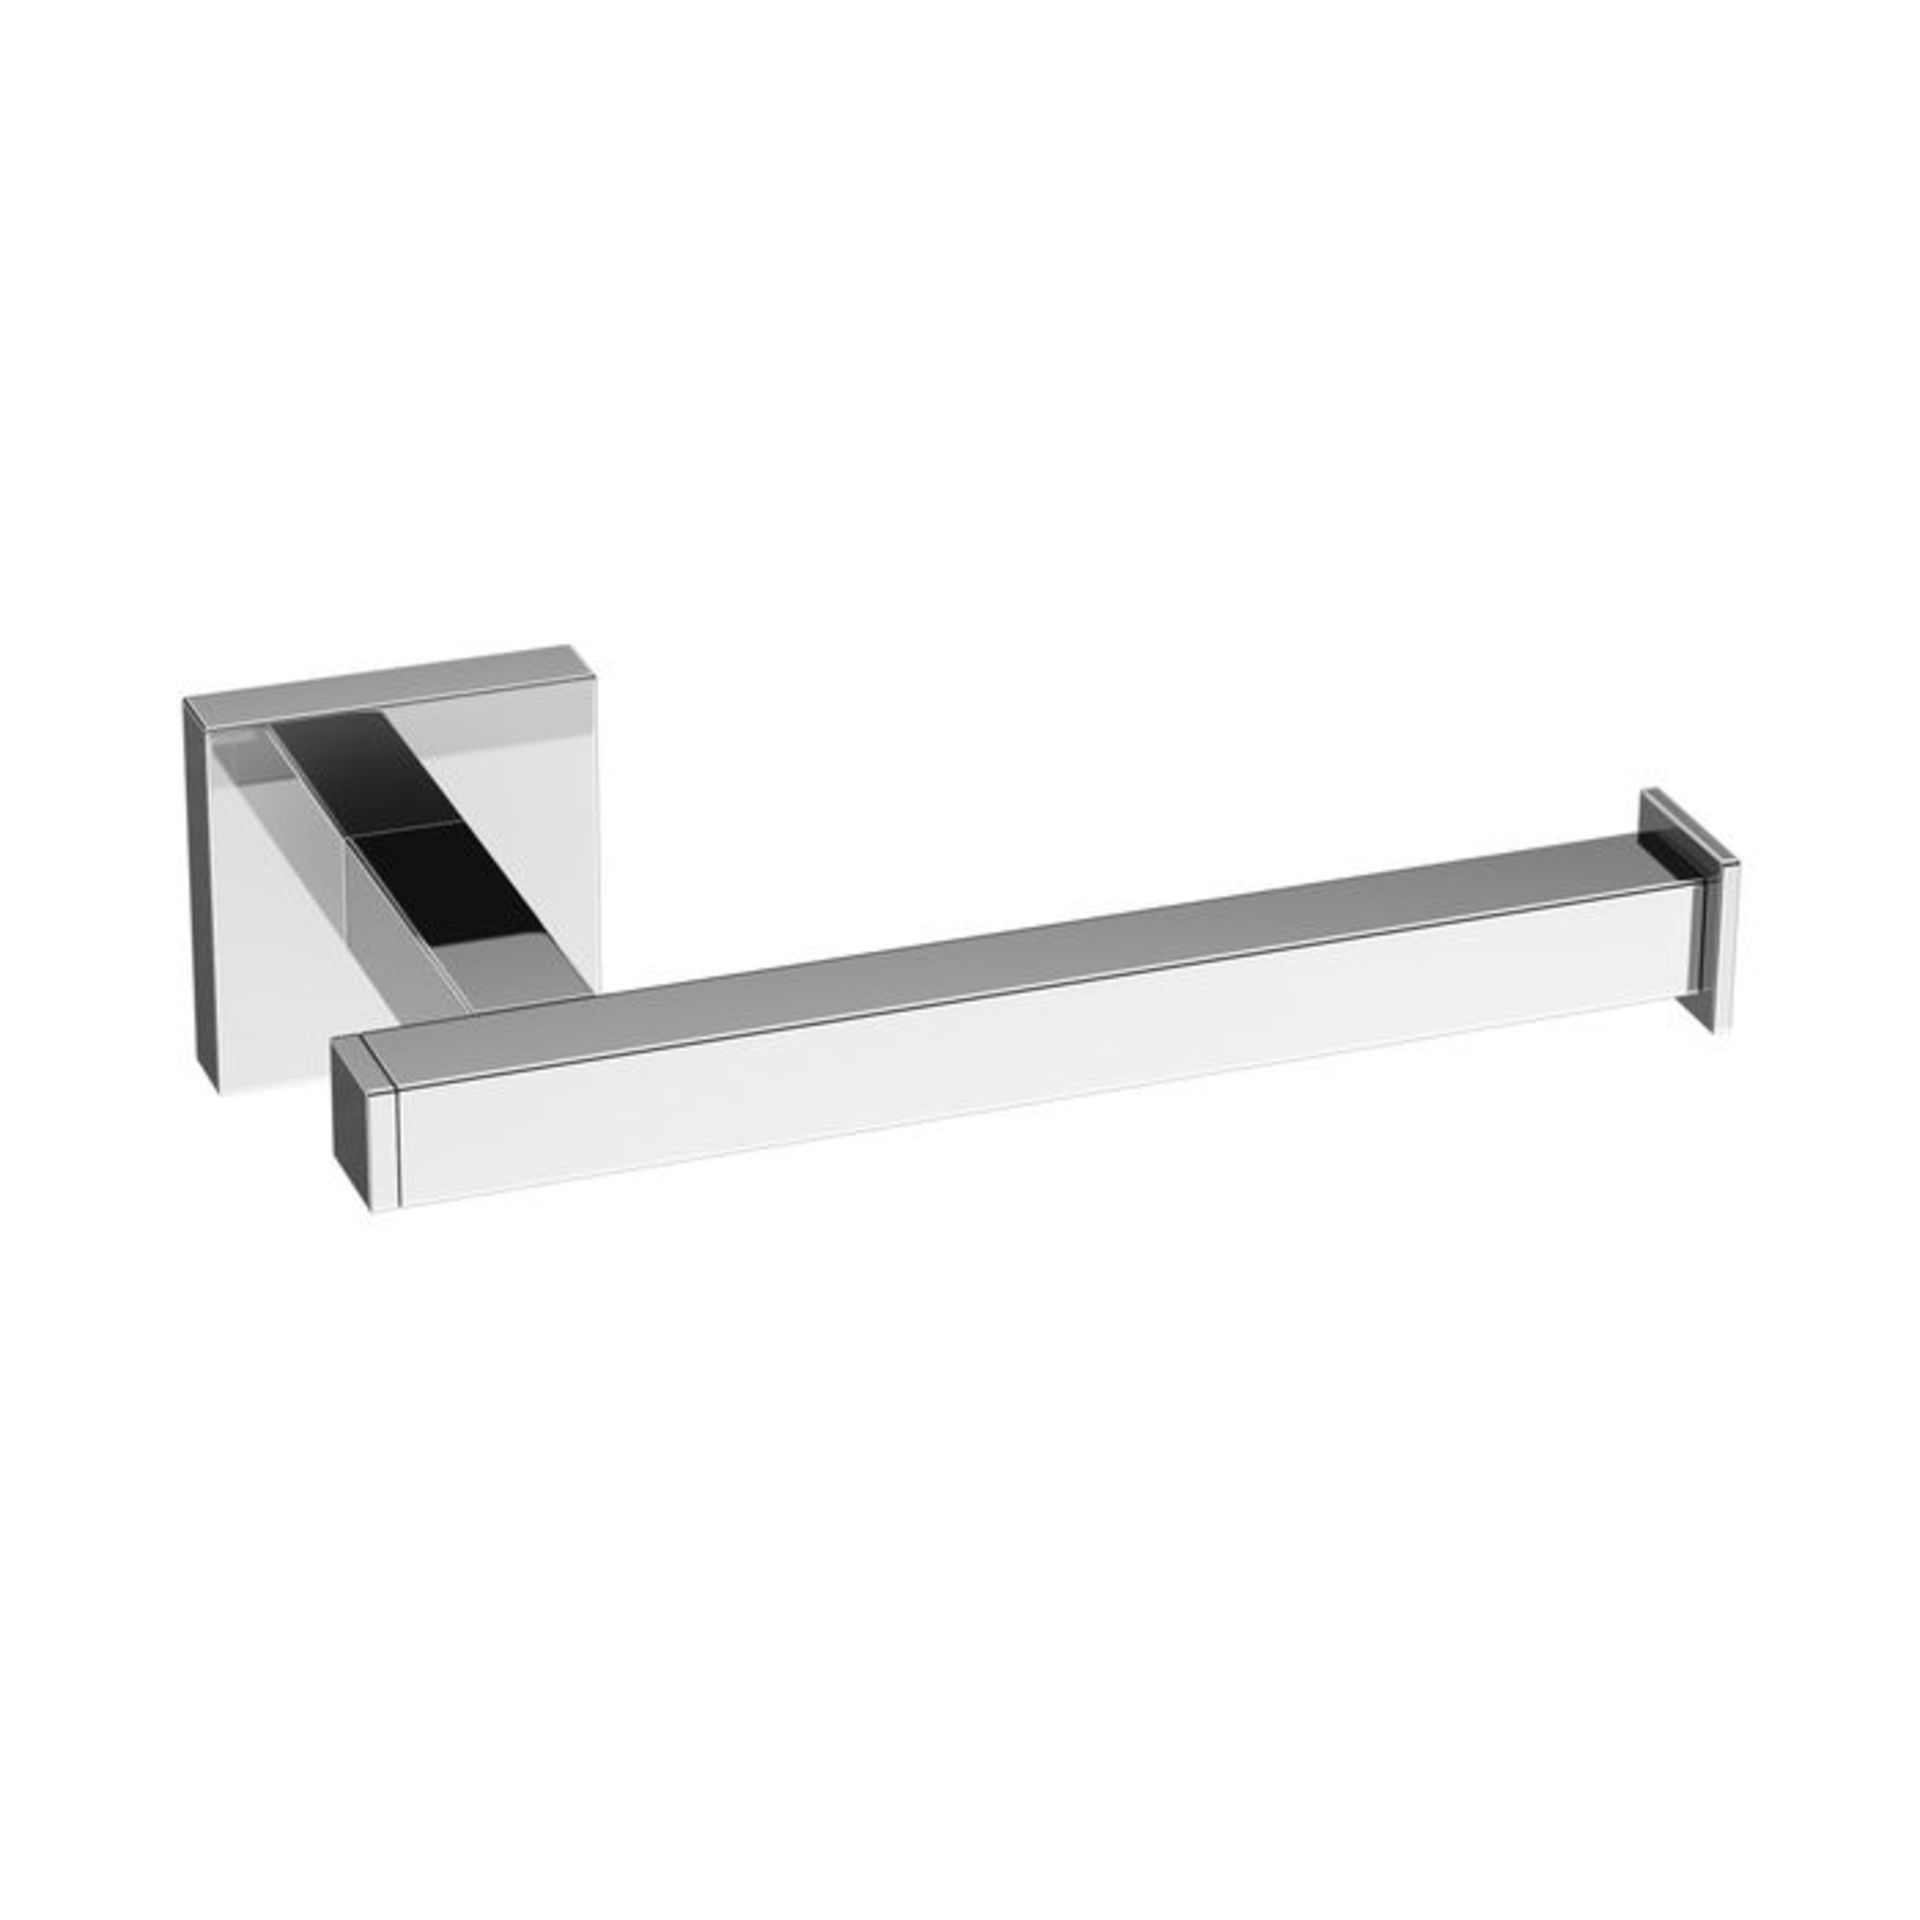 (AL36) Jesmond Toilet Roll Holder Finishes your bathroom with a little extra functionality and style - Image 2 of 3